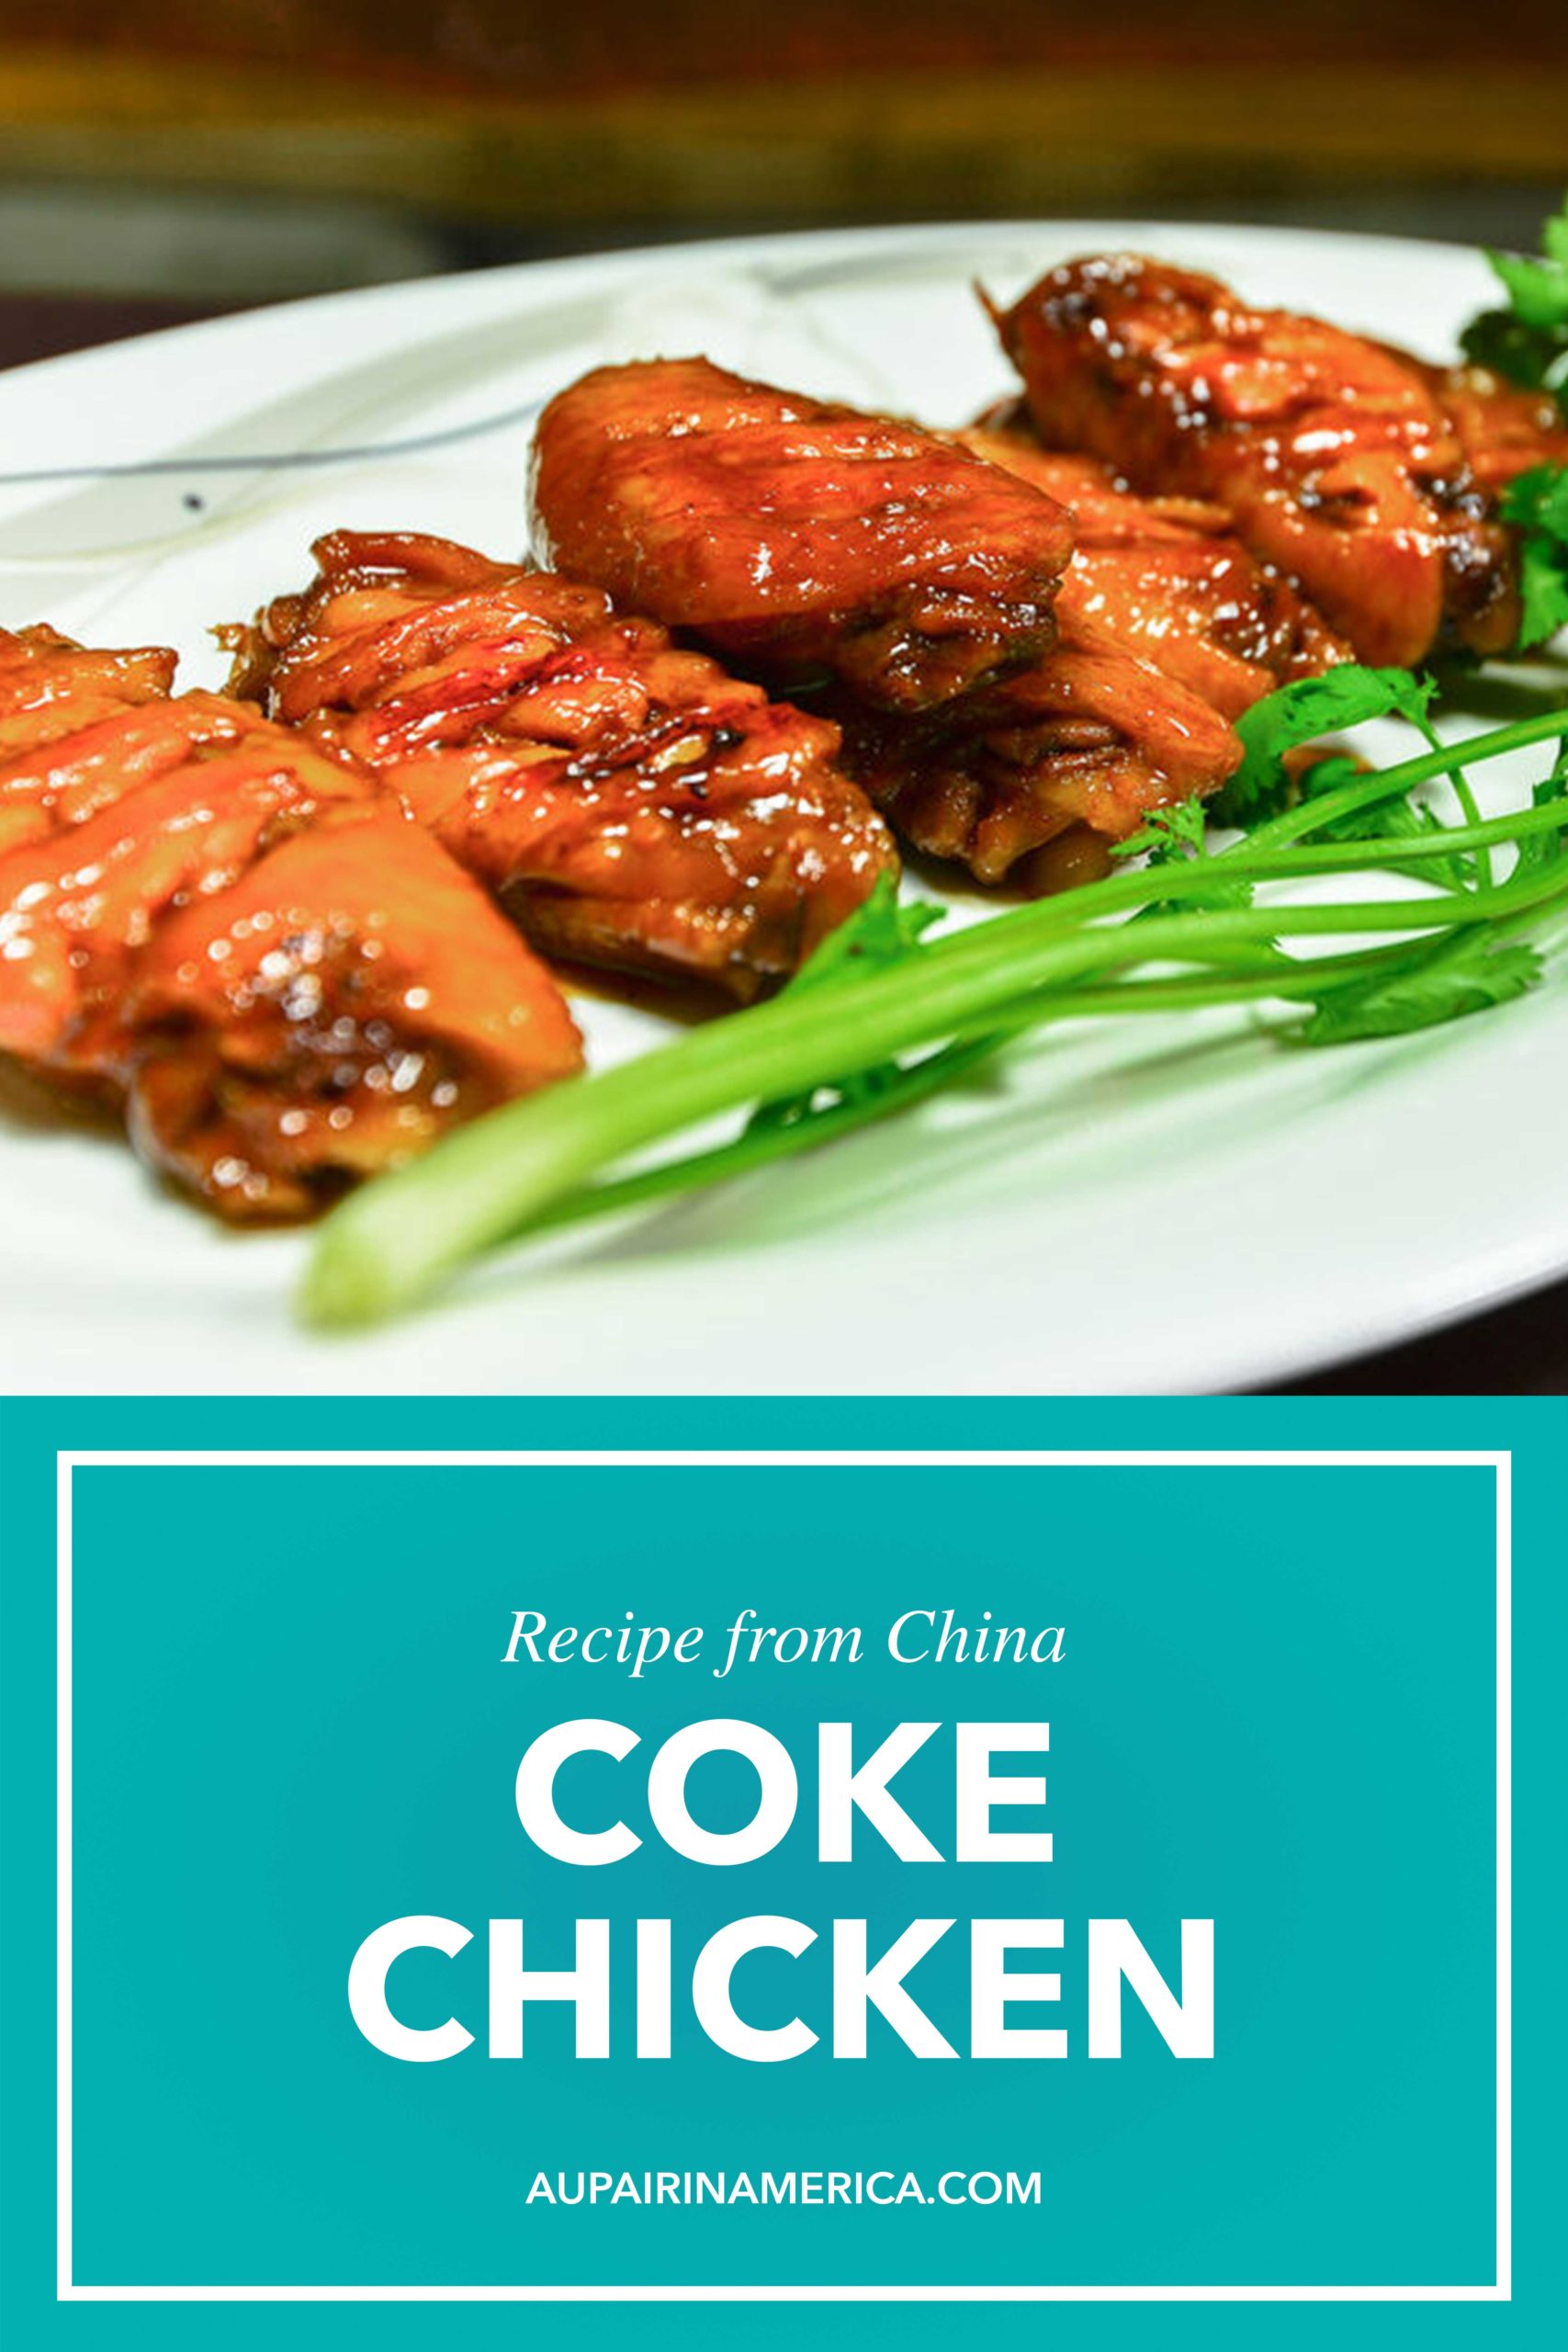 Coke Chicken from China | Au Pair in America